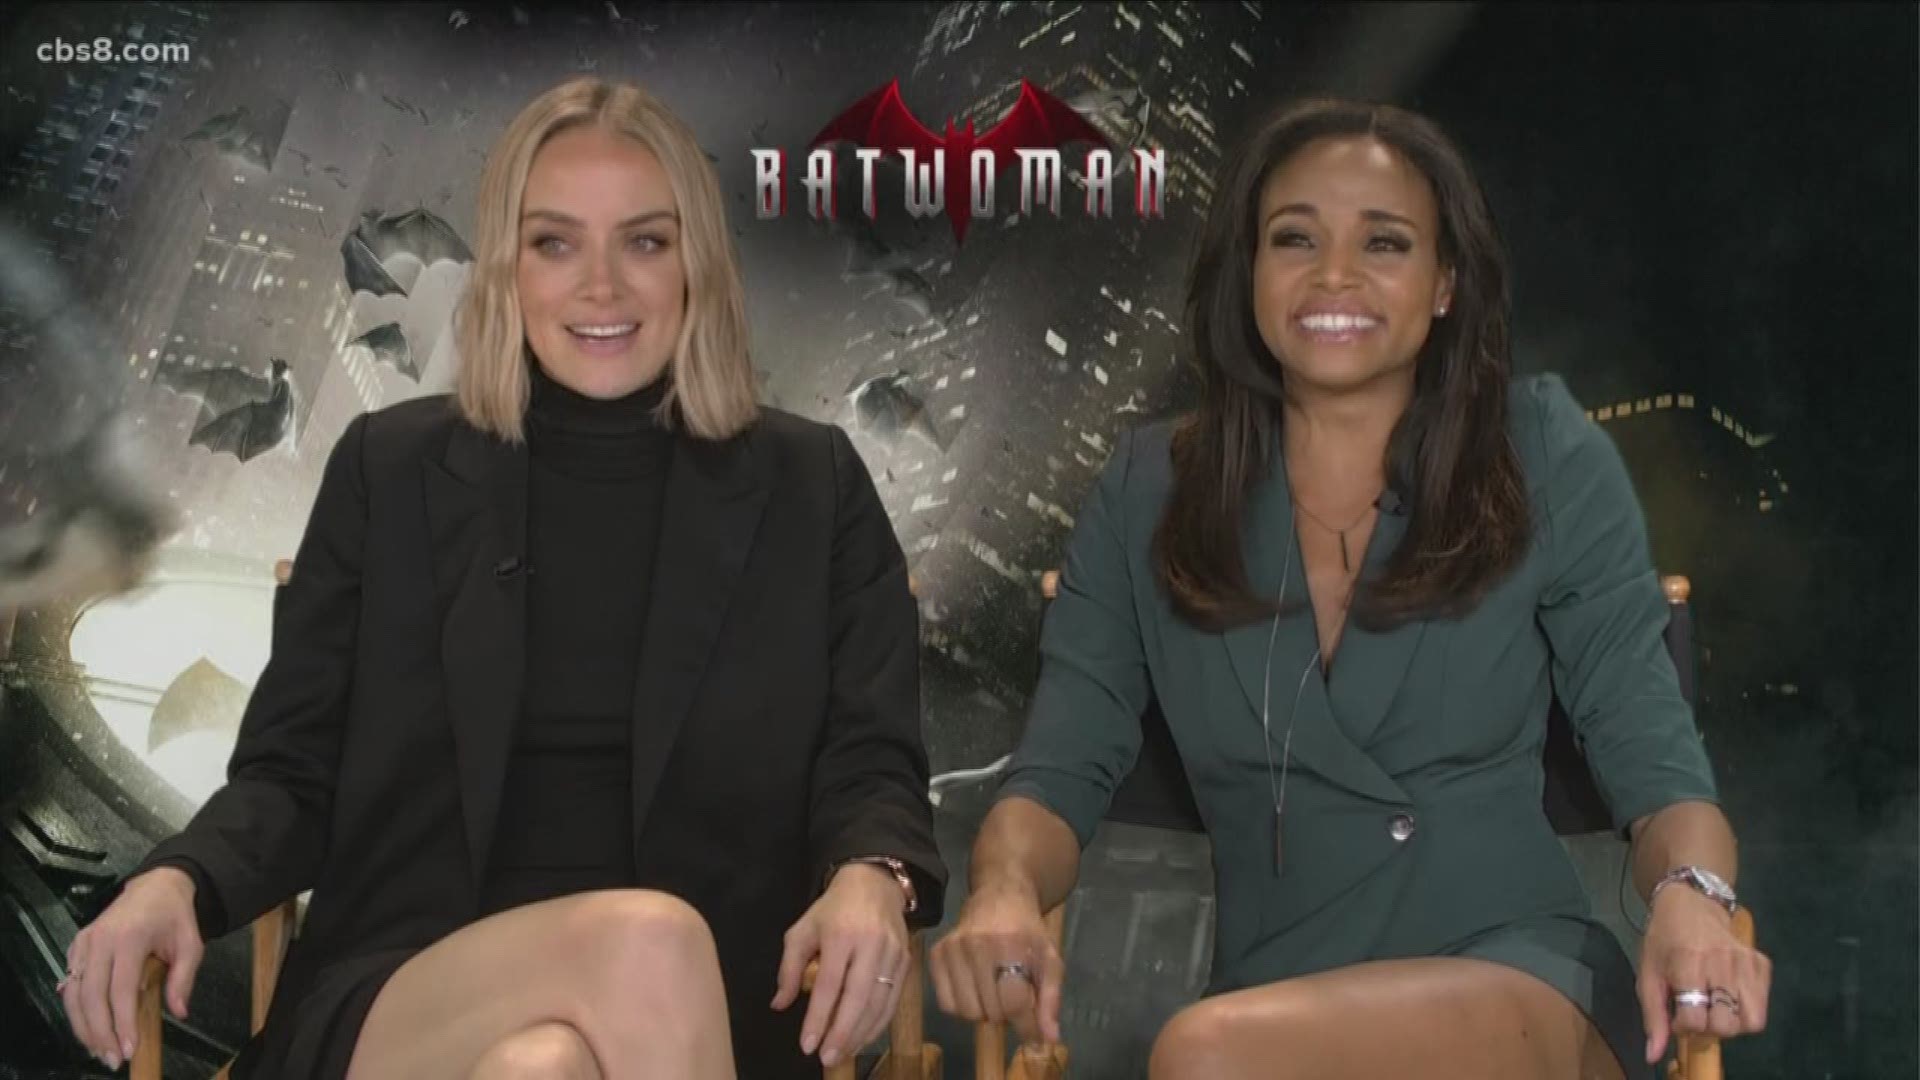 Meagan Tandy & Rachel Skarsten from Batwoman talked about growing up being a Batman fan and what it is like playing in a show that’s focused on female empowerment.